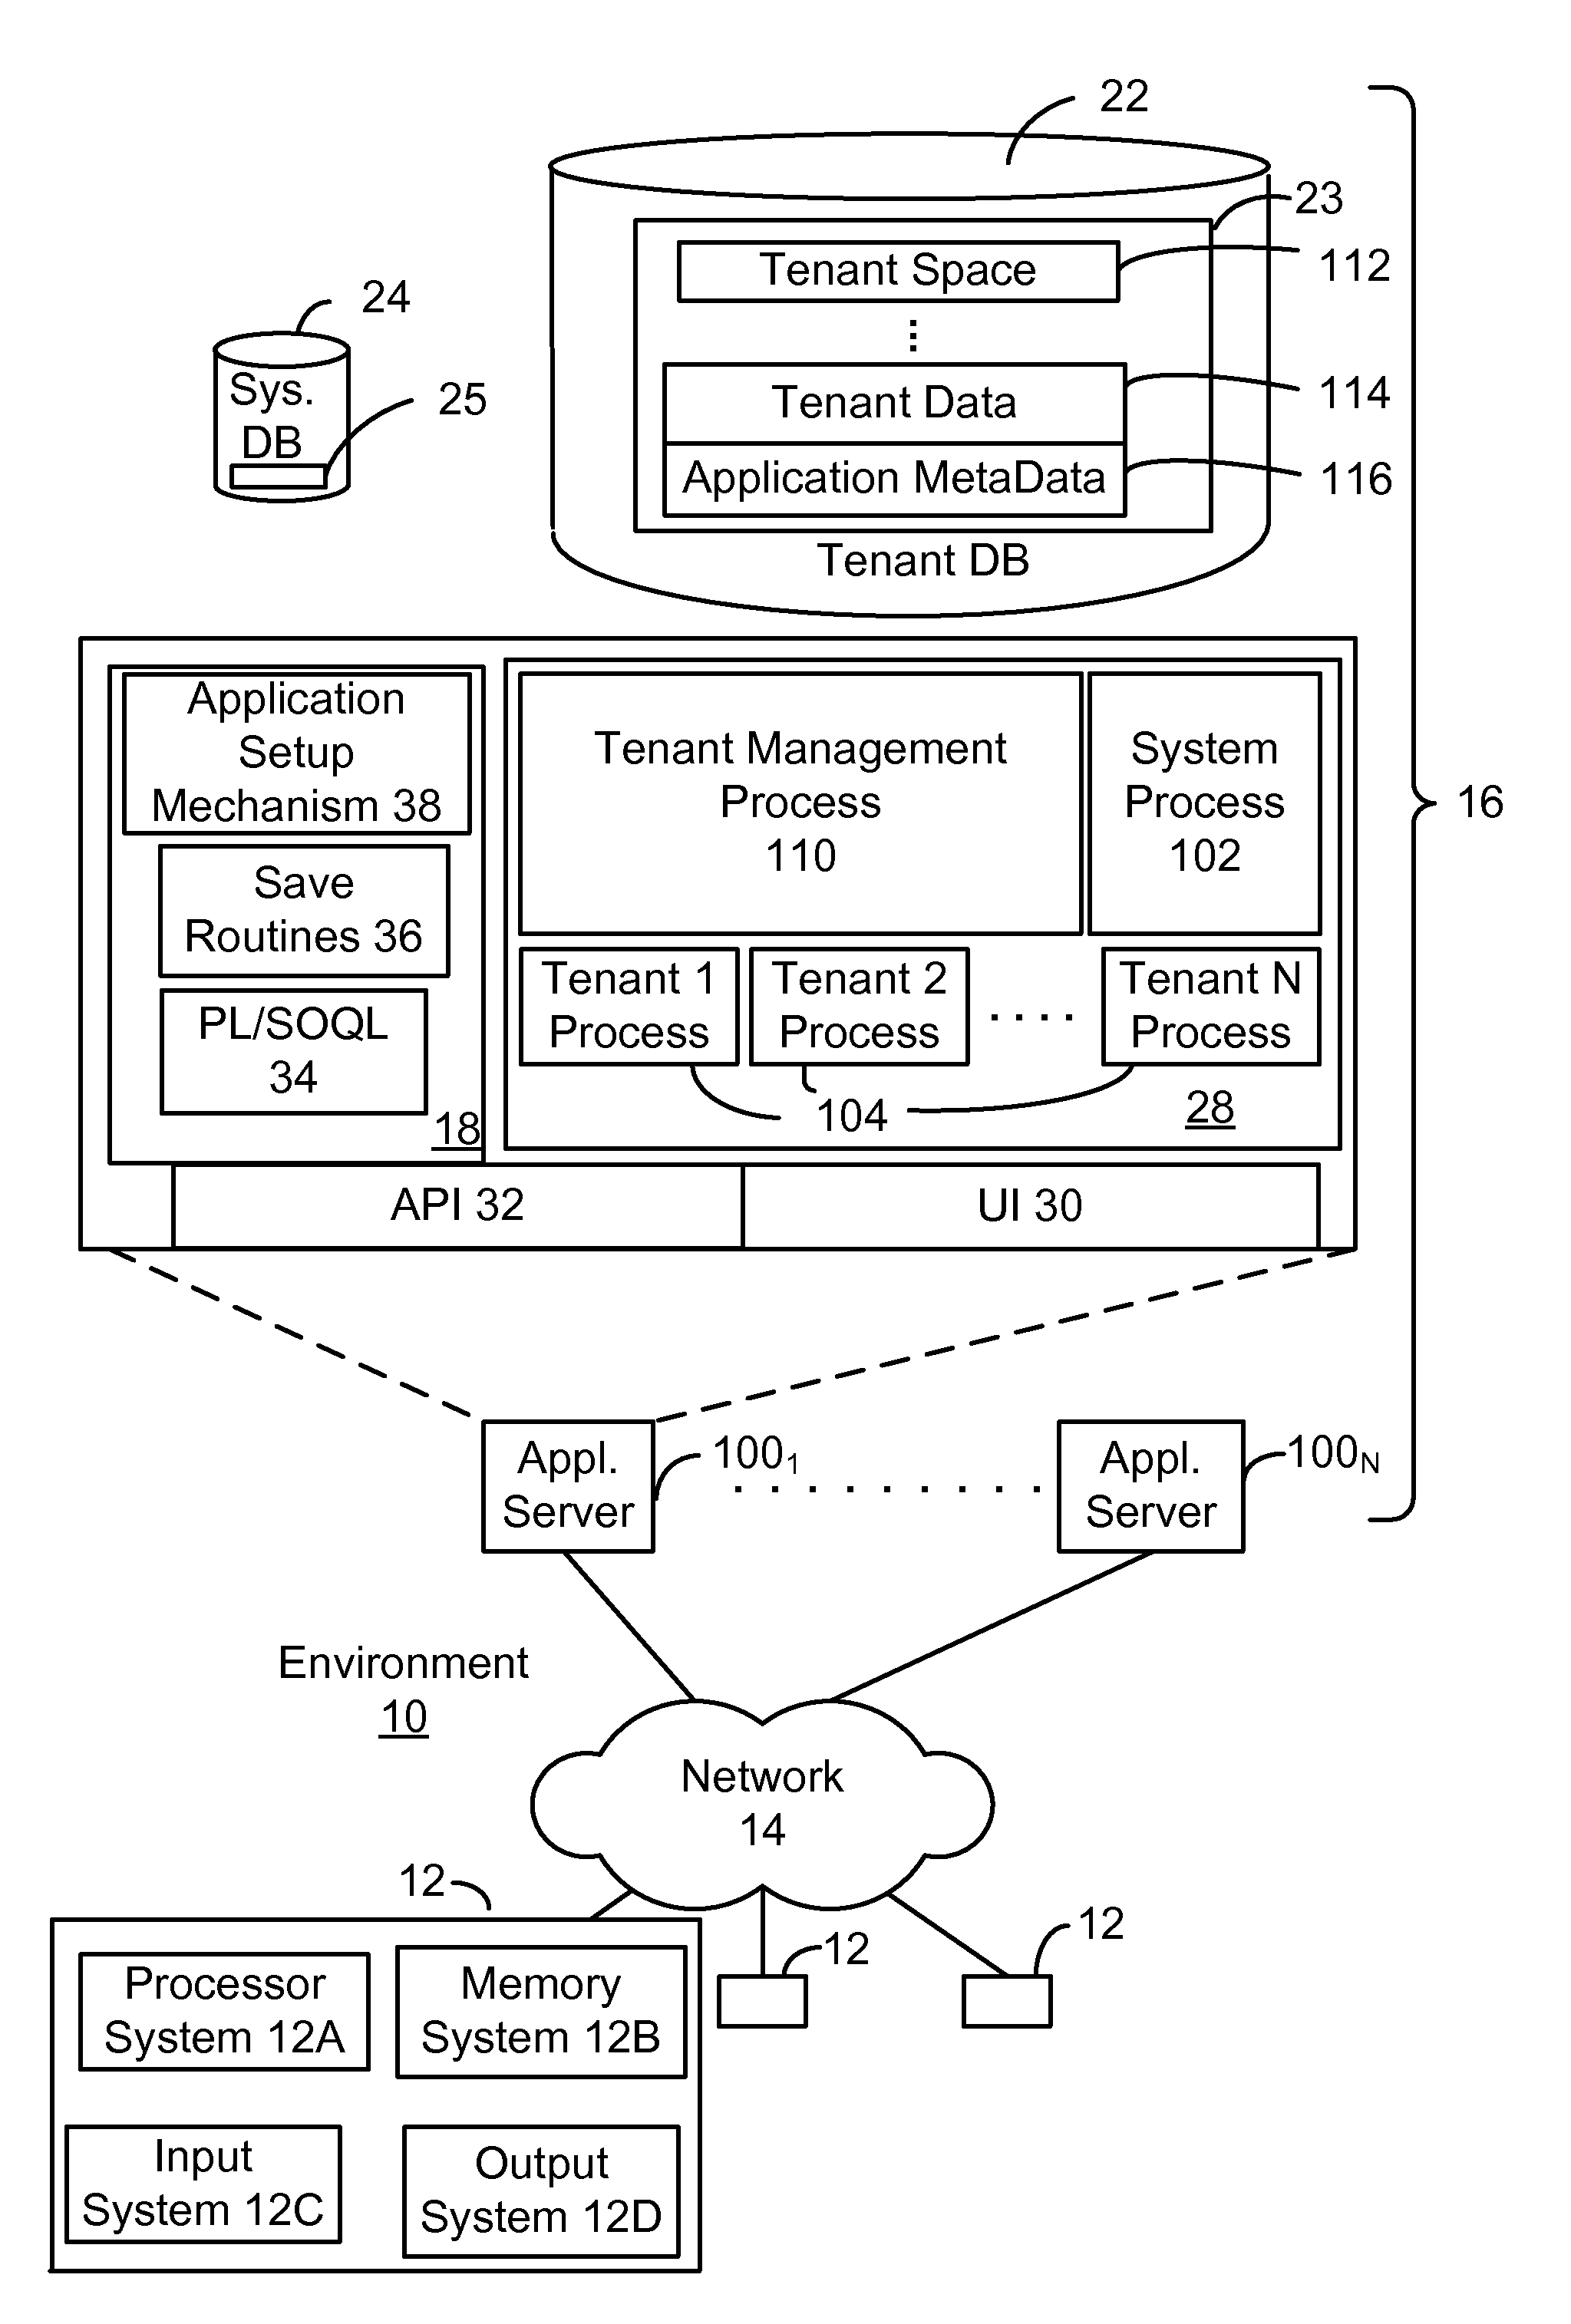 Methods and systems for performing email management customizations in a multi-tenant database system